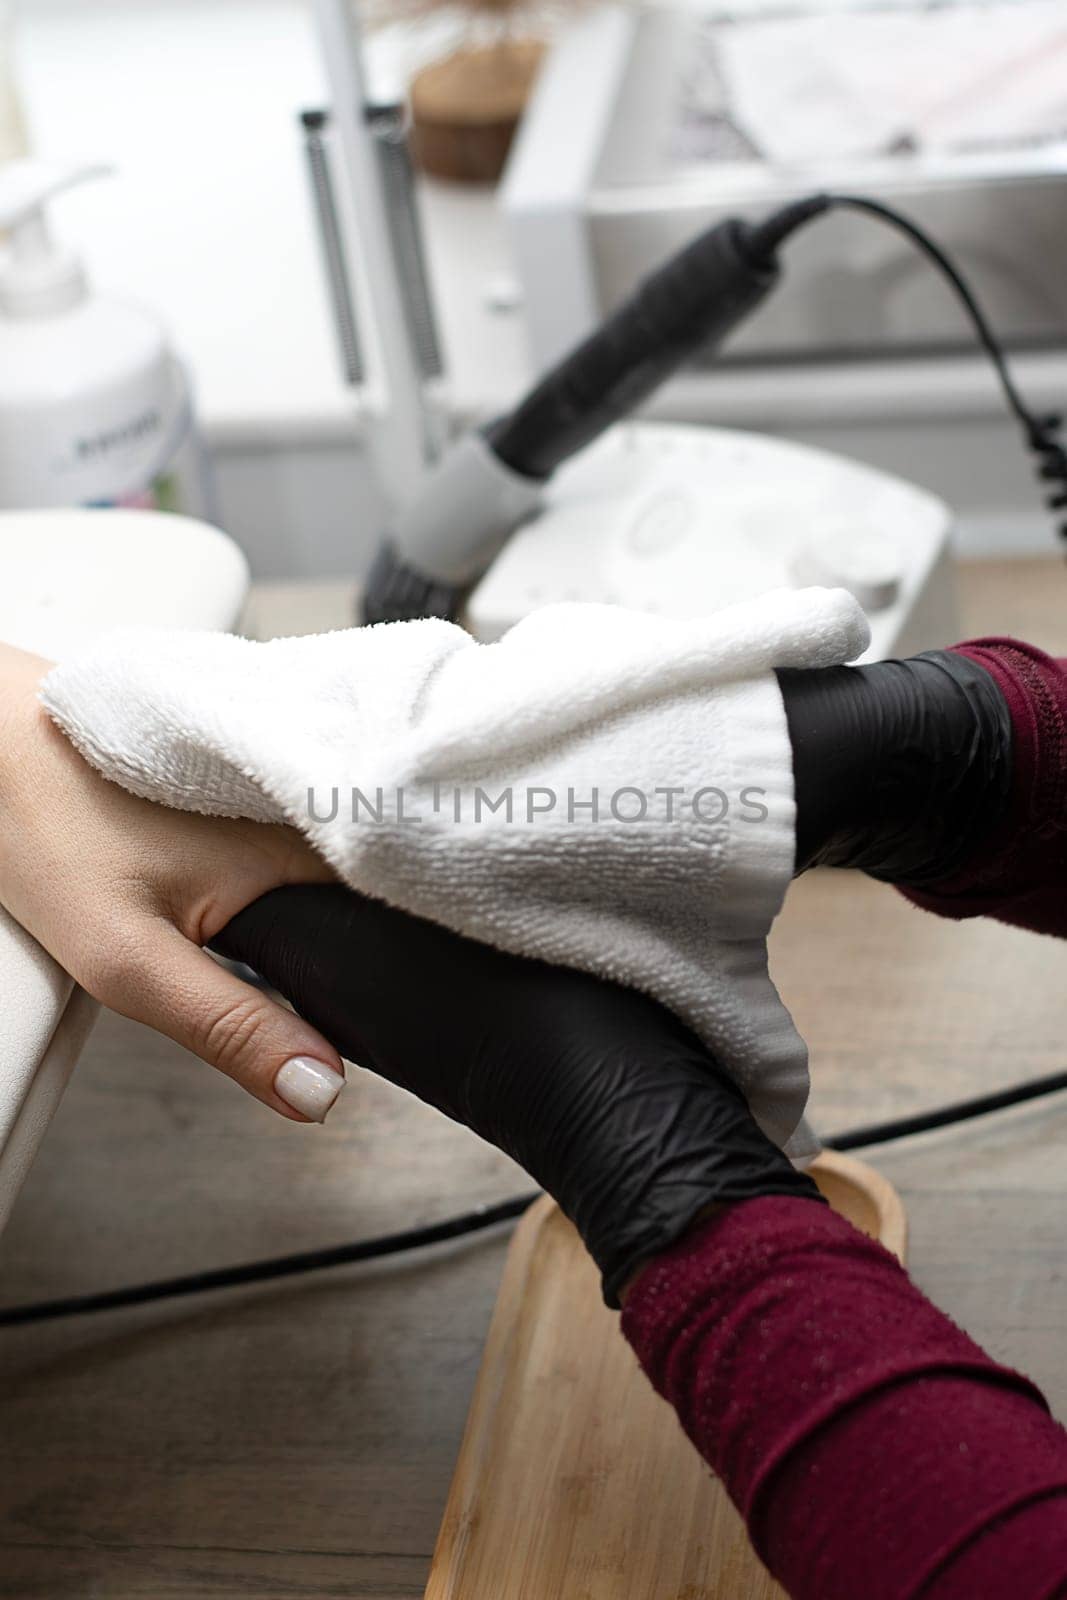 Beauty concept. A manicurist in black latex gloves makes a hygienic manicure, paints the client's nails with gel polish and wipes his hands with a towel in a beauty salon. Close-up. Vertical.